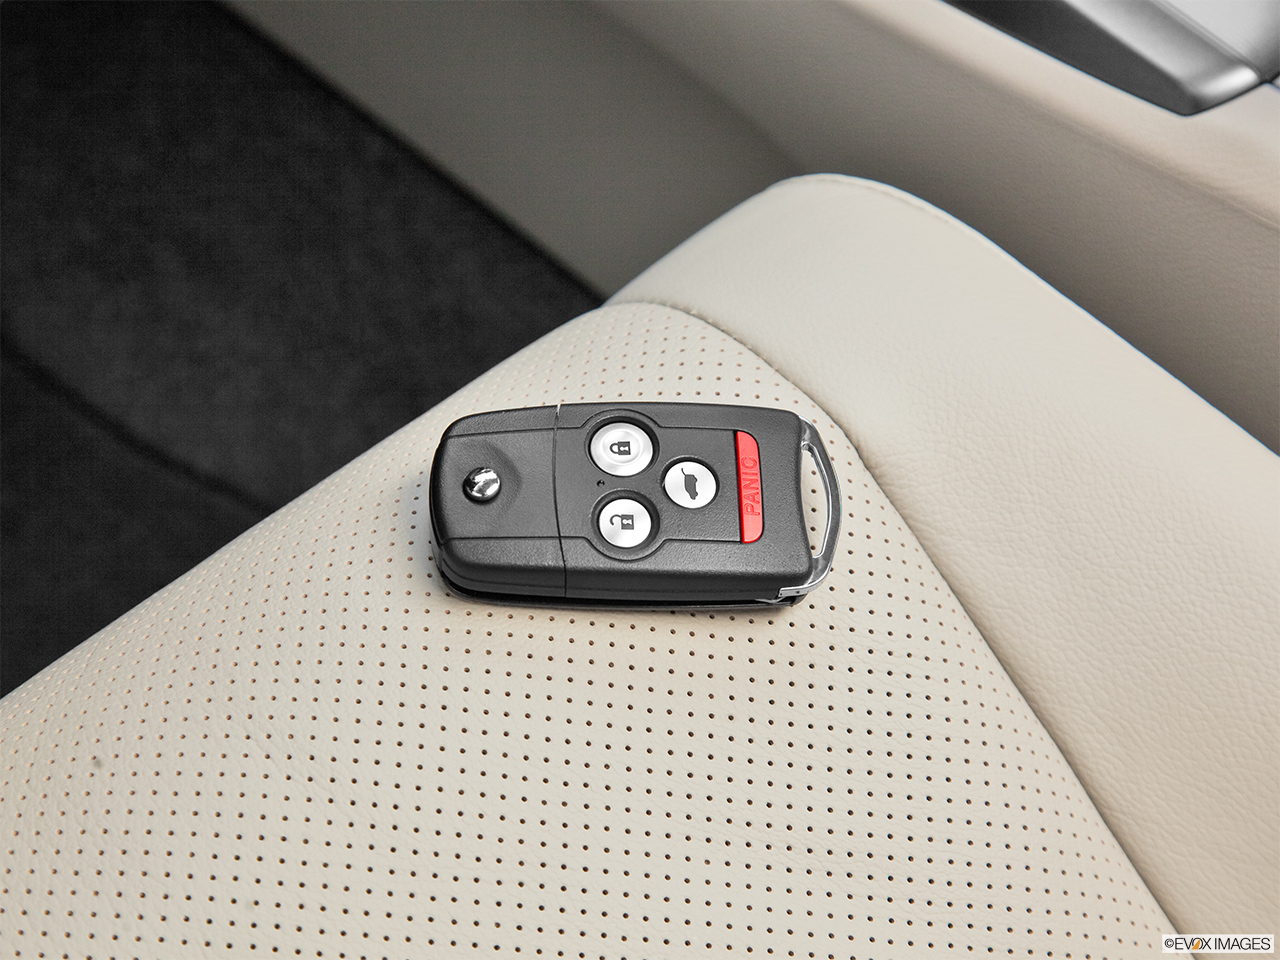 2012 Acura TSX Sport Wagon Key fob on driver's seat. 